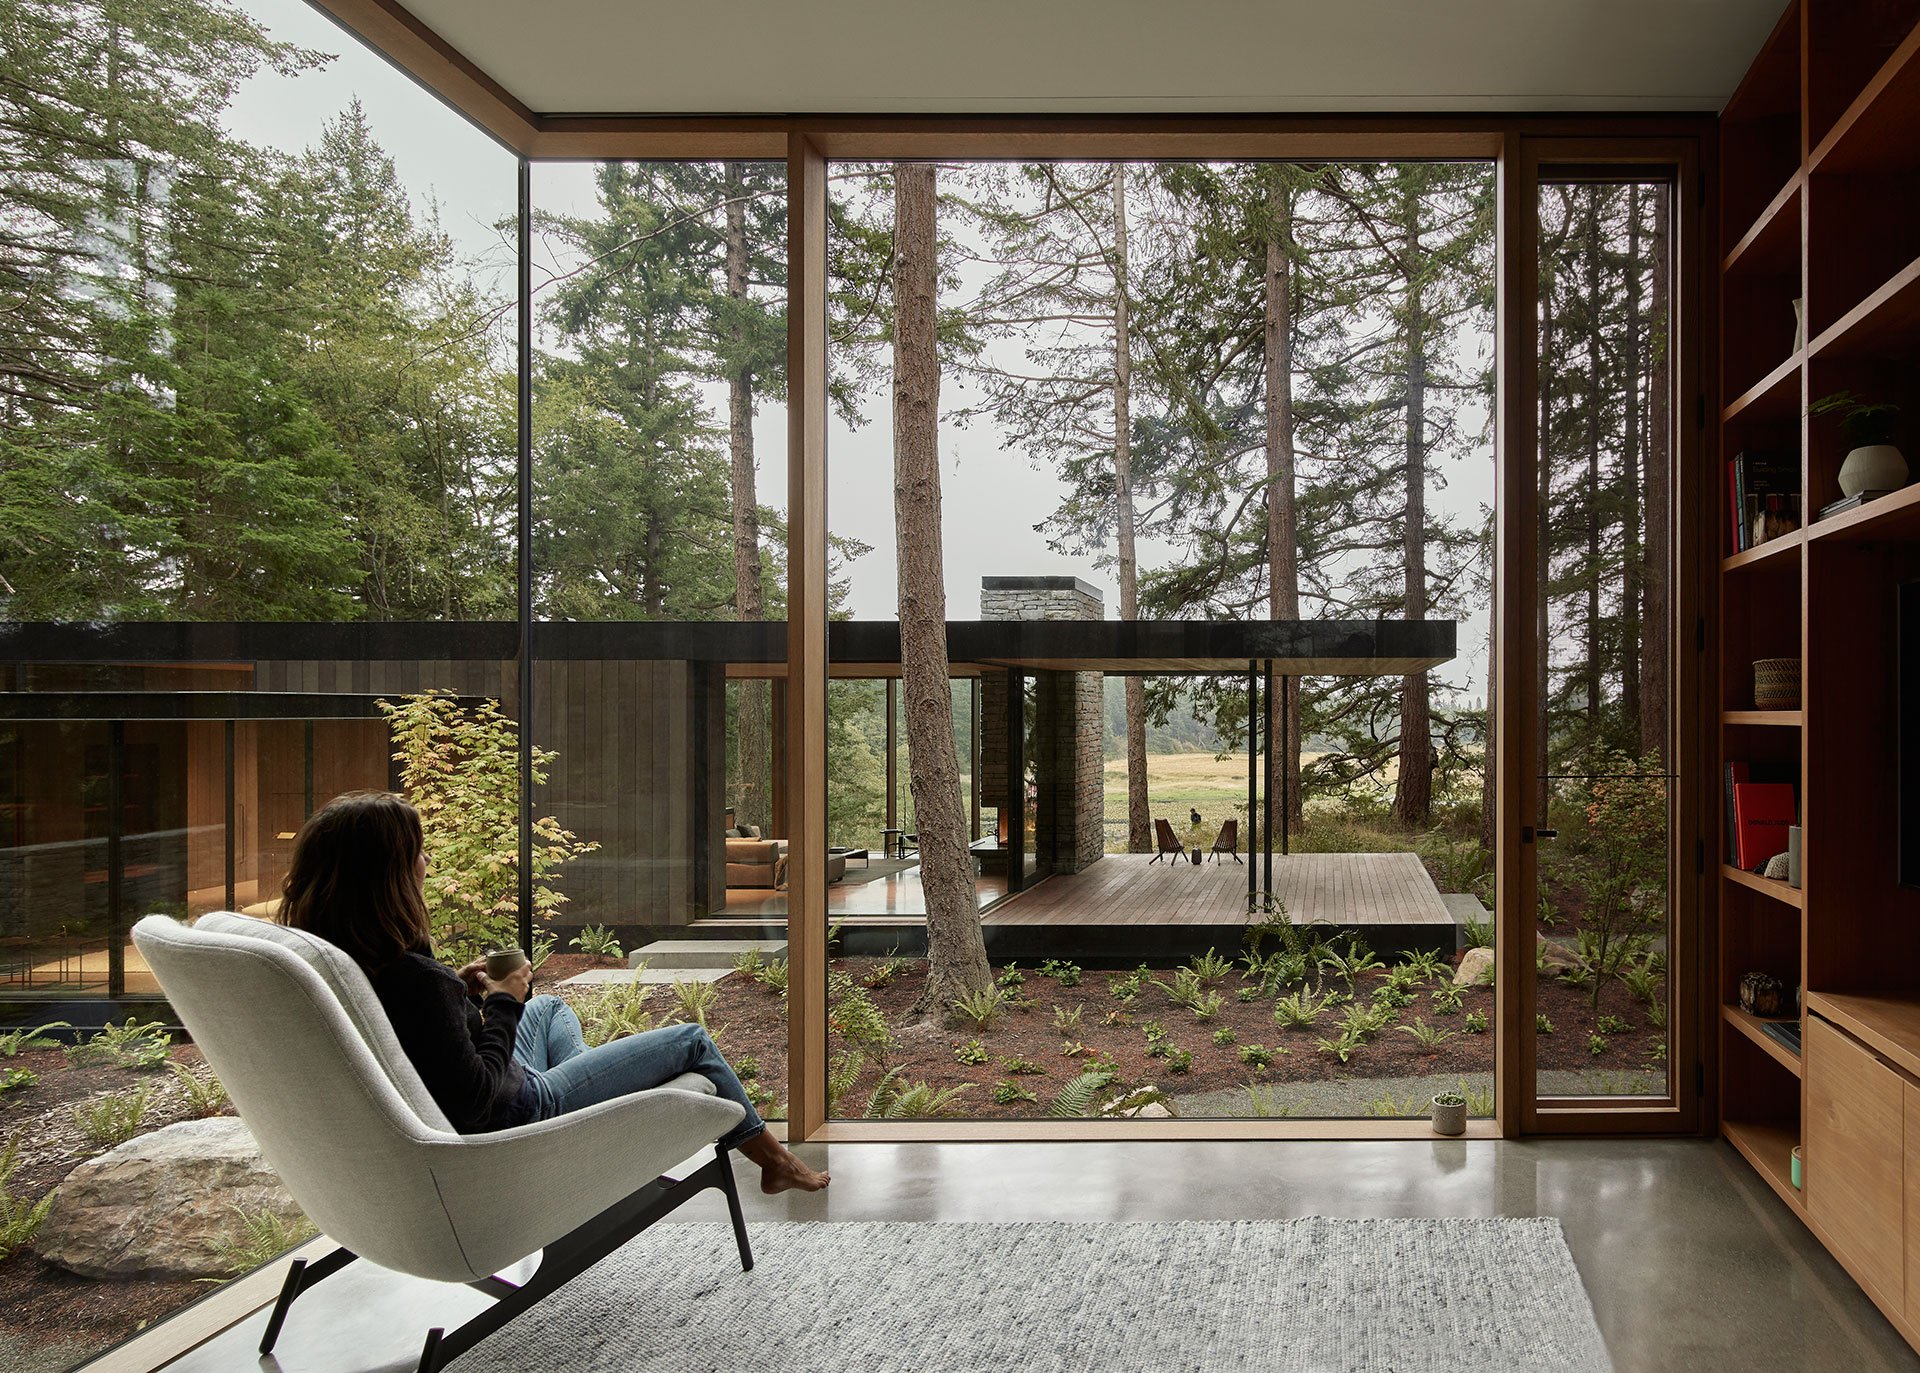 Whidbey Farm by mwworks.
Photo by Kevin Scott.